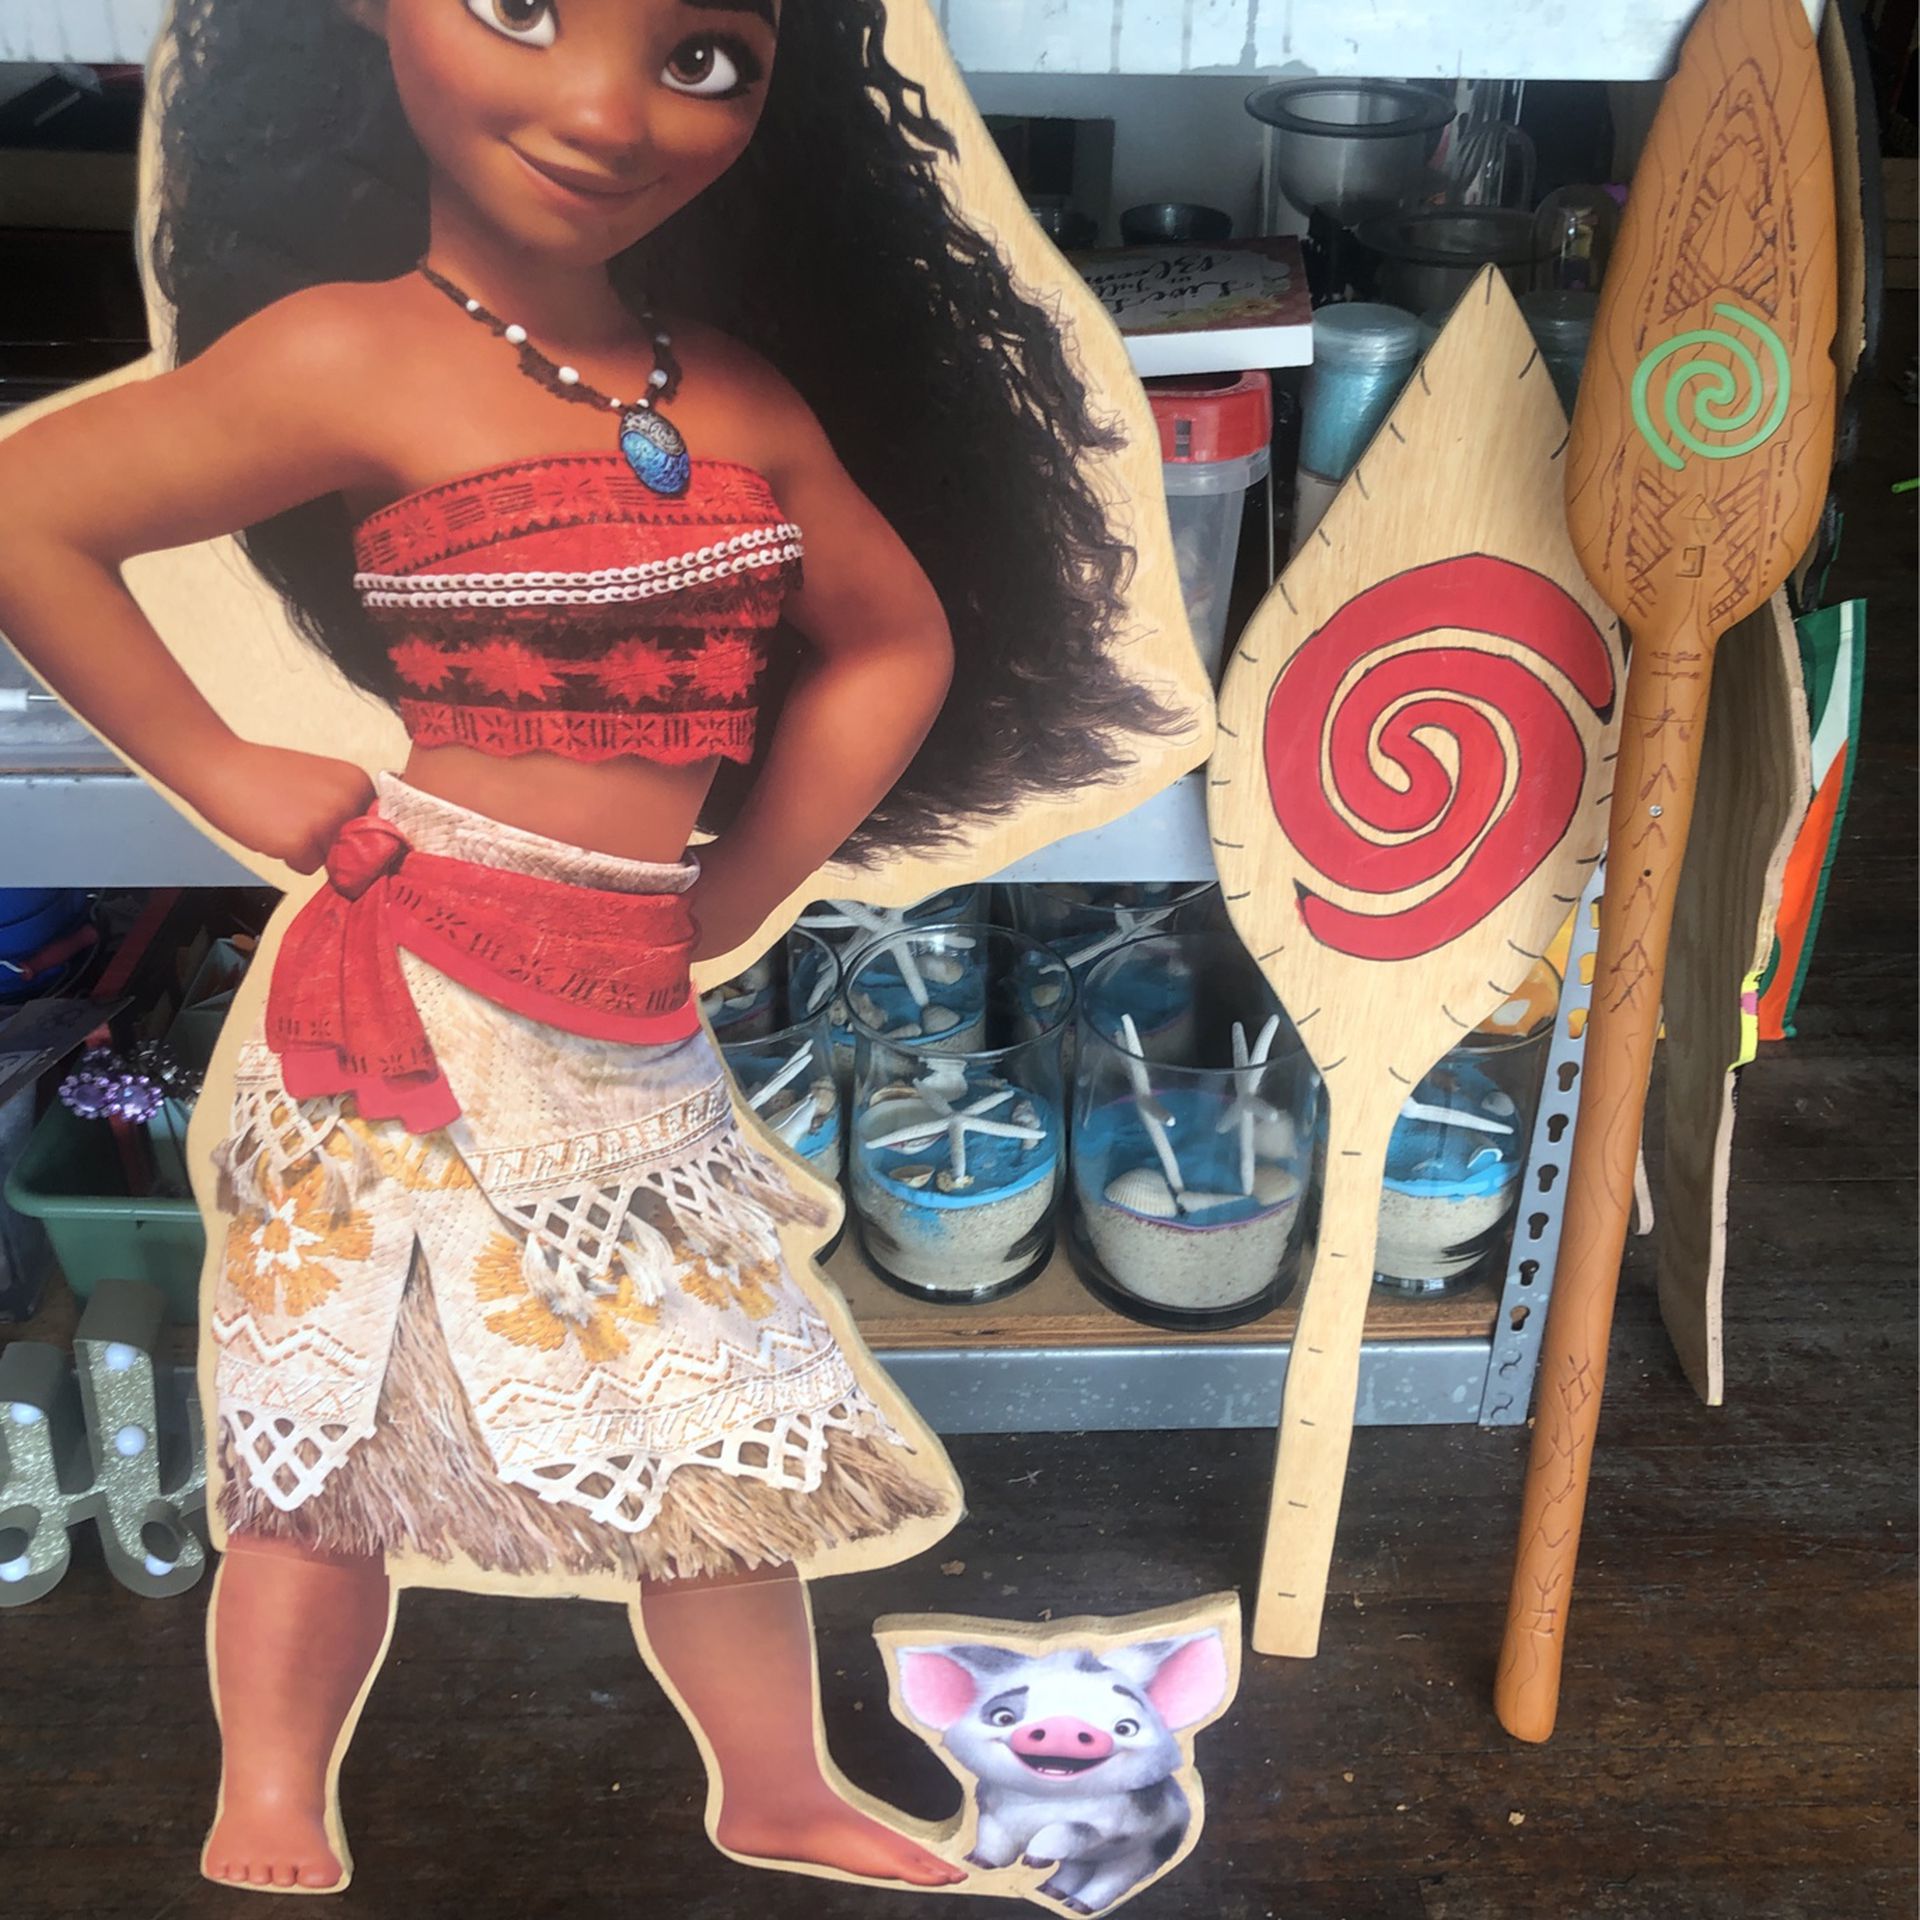 Moana props Wood Stands  decorations